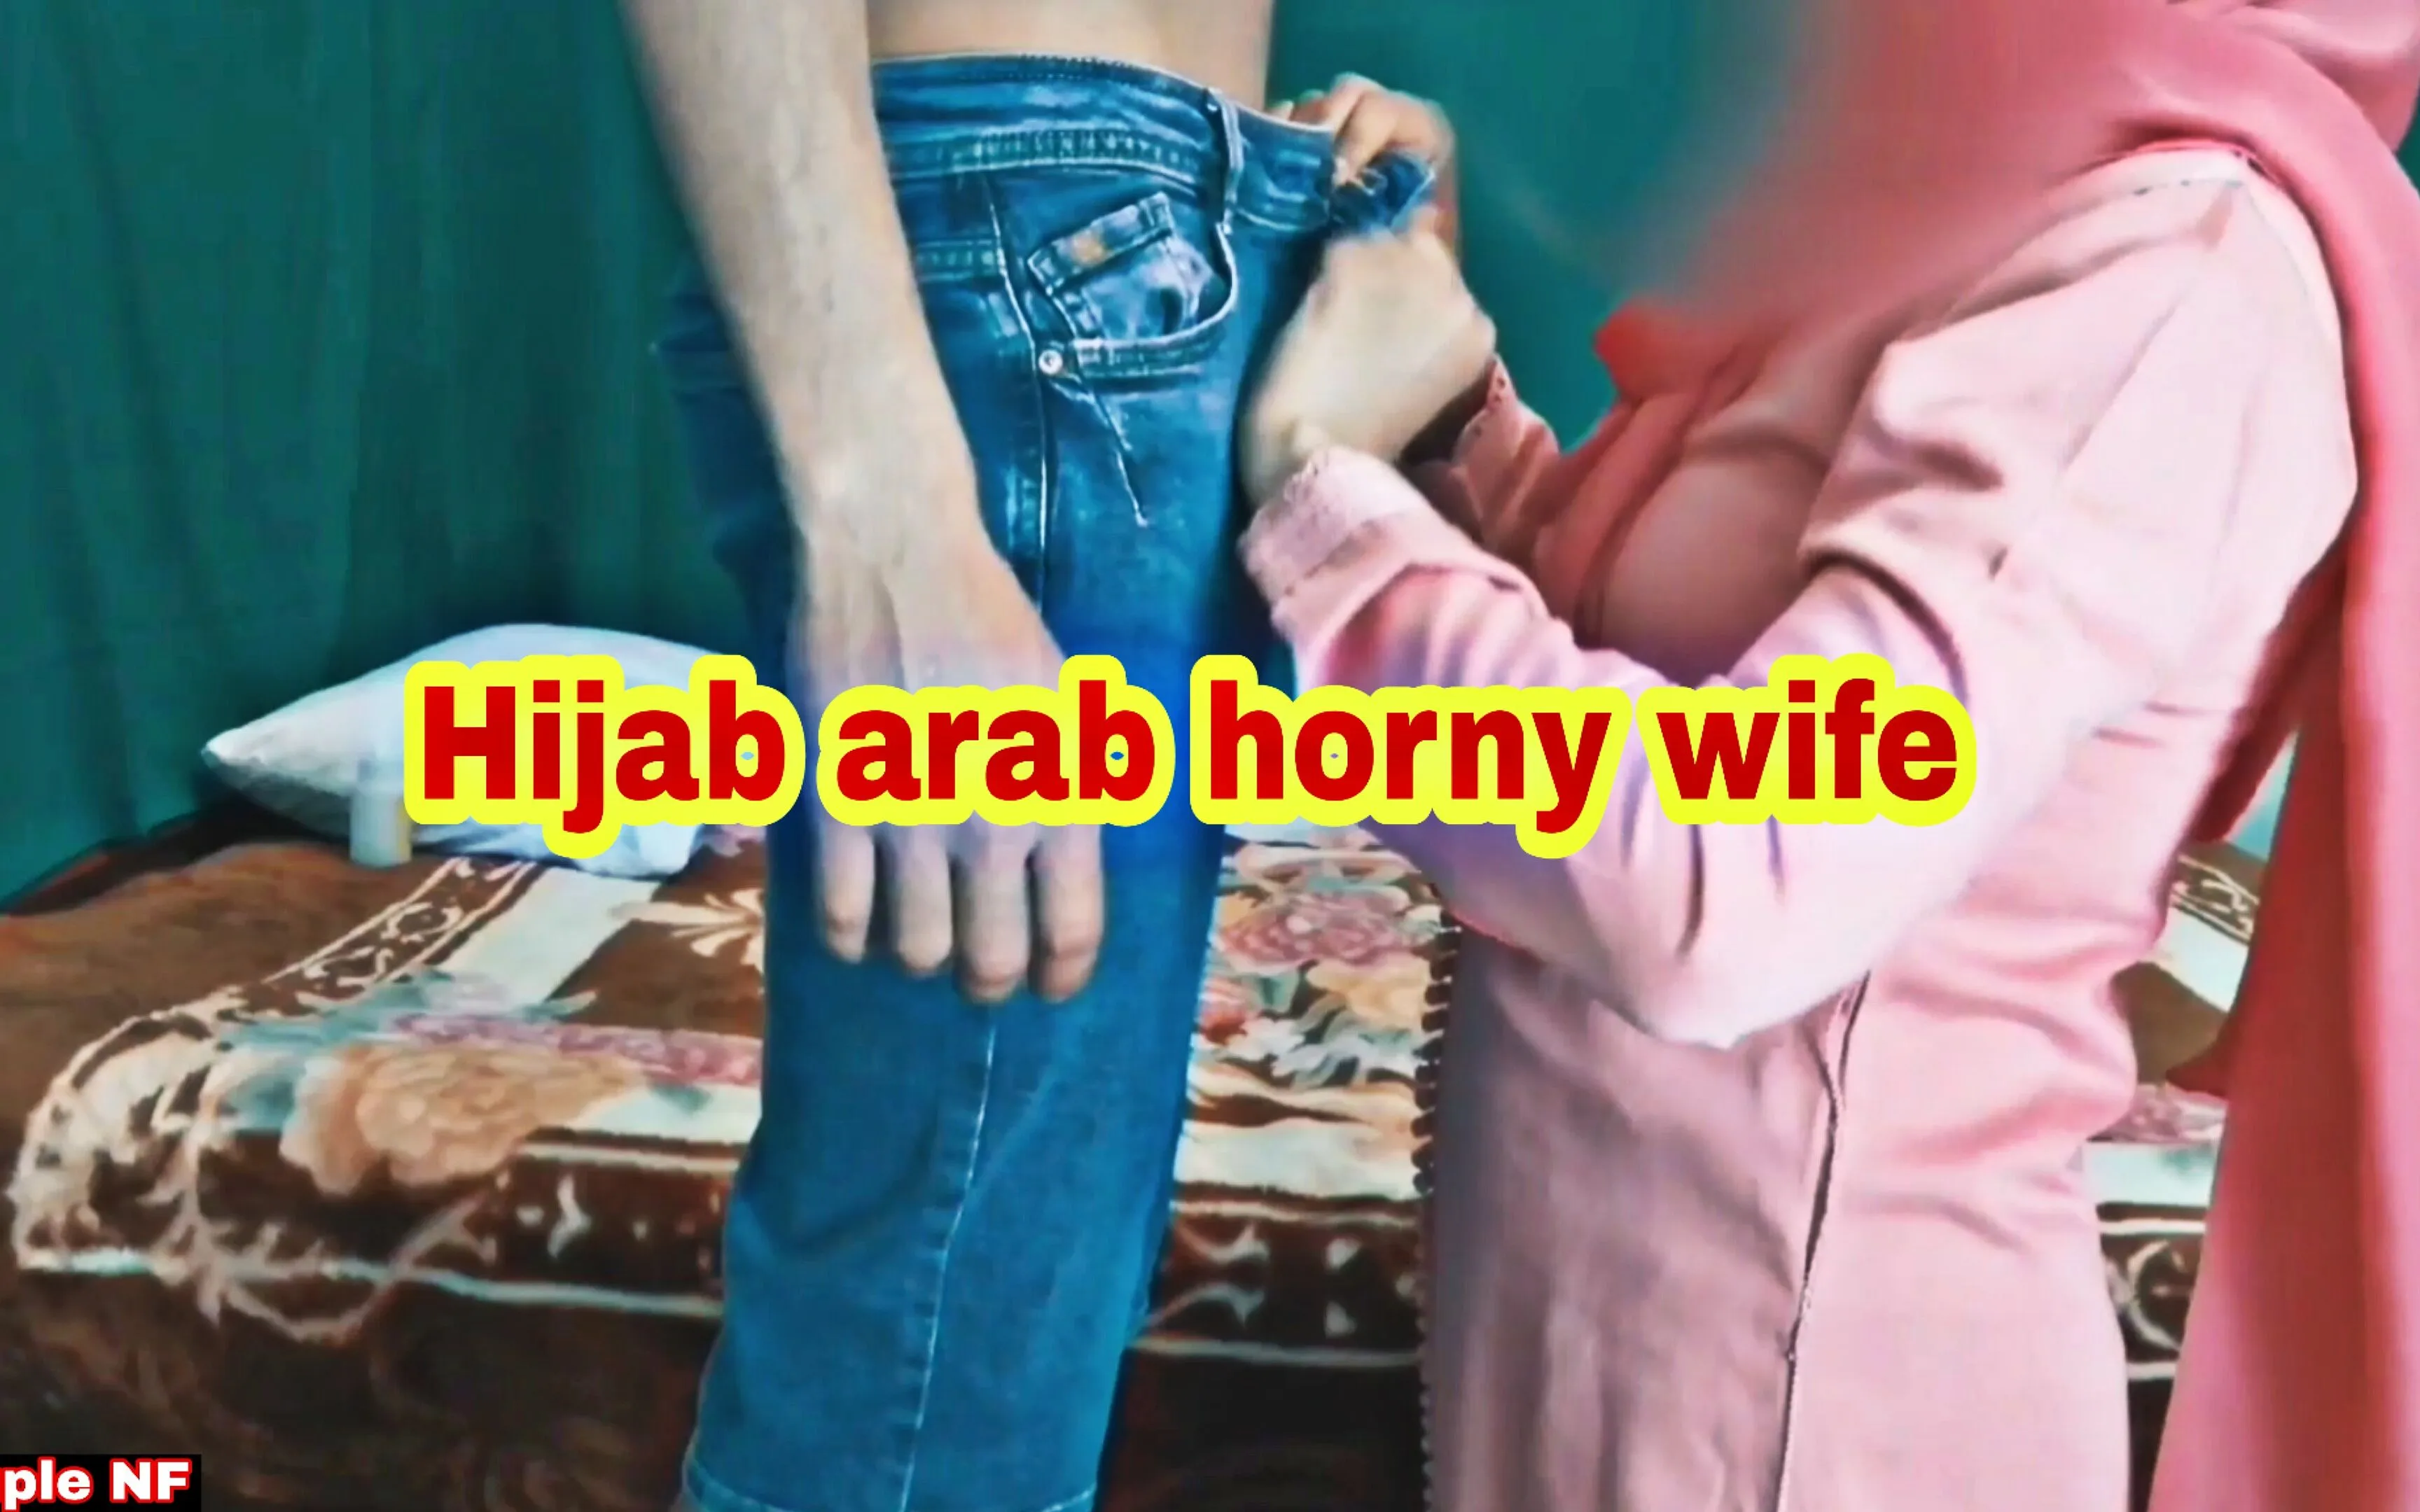 Hijab arab wife came home horny giving blowjob and getting fucked hard by Arab couple NF Faphouse